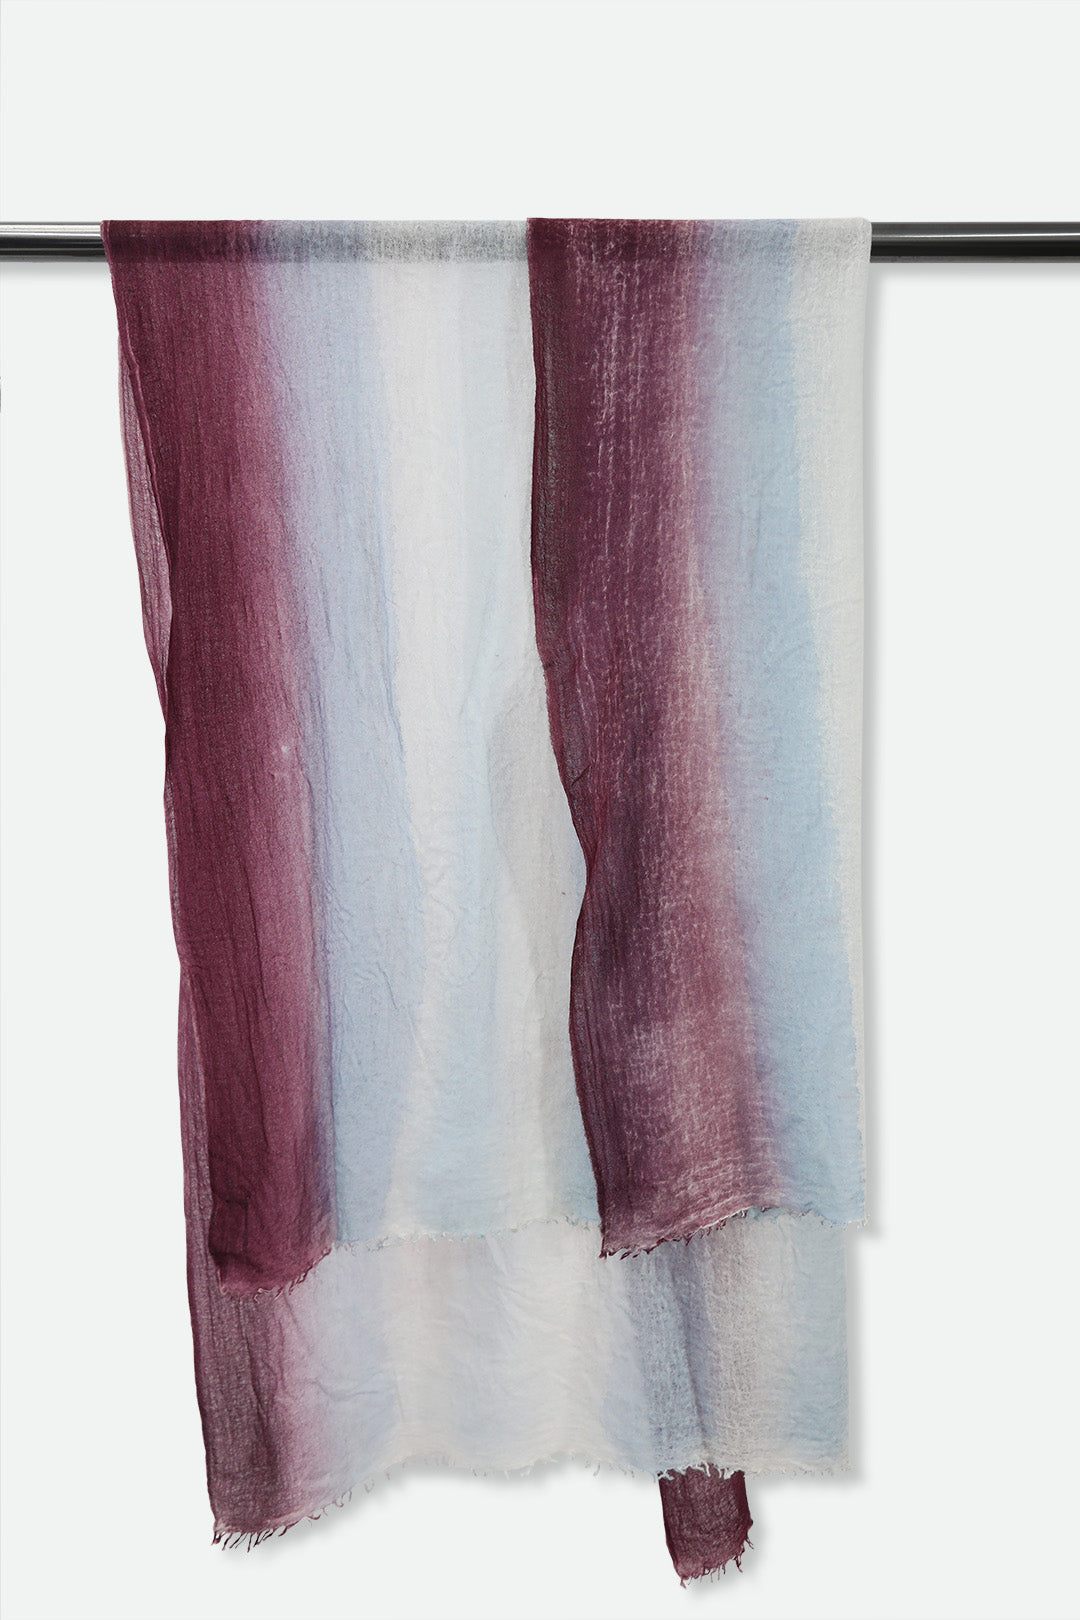 PLUM SKY SCARF IN HAND DYED CASHMERE